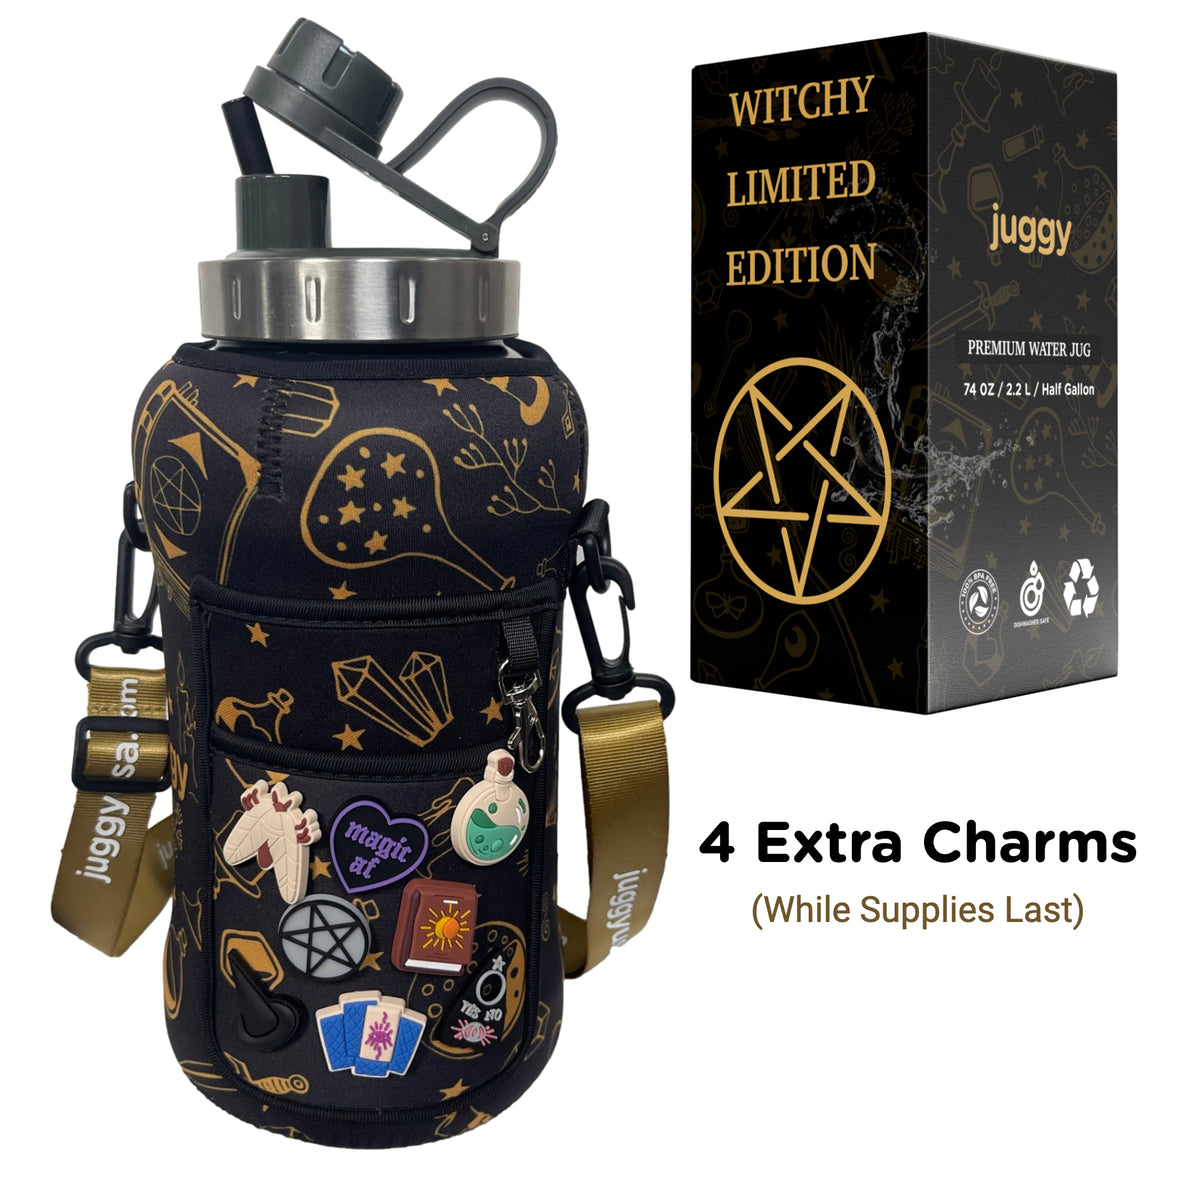 Witchy Special Edition Bundle – JUGGY